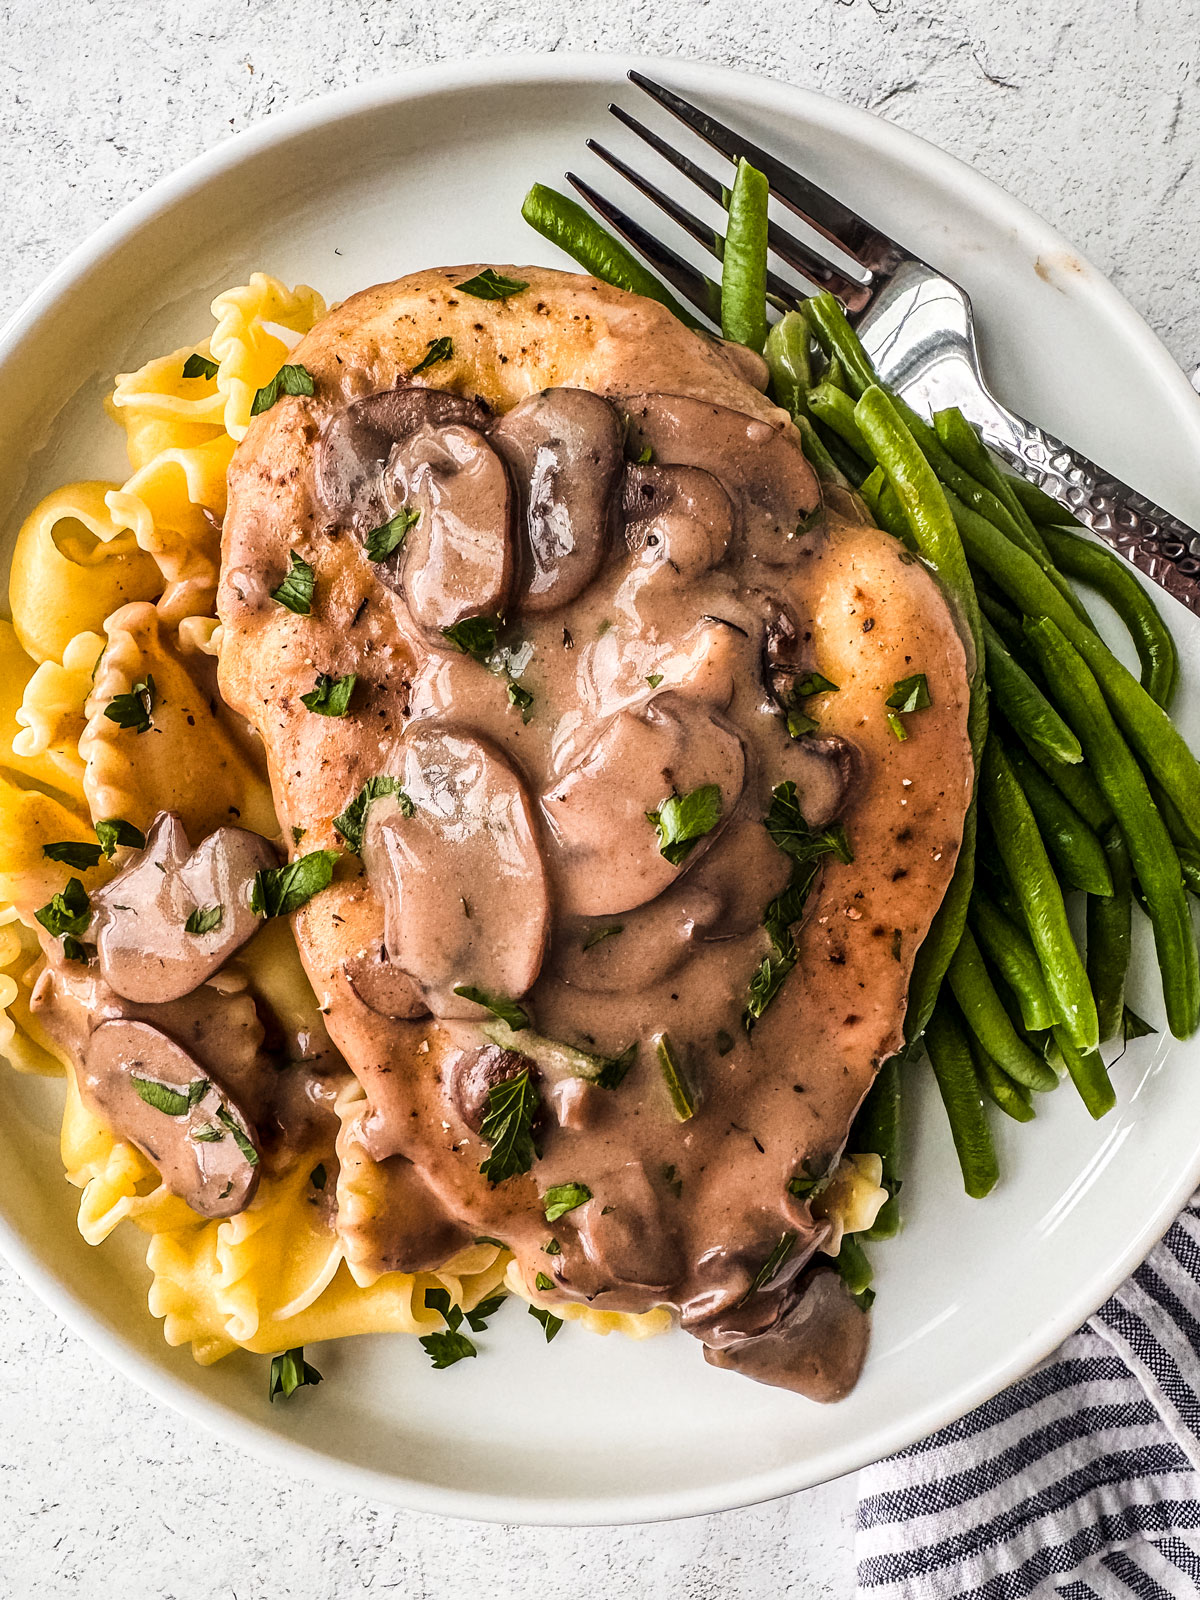 A chicken cutlet smothered in creamy mushroom sauce served over noodles and green beans.